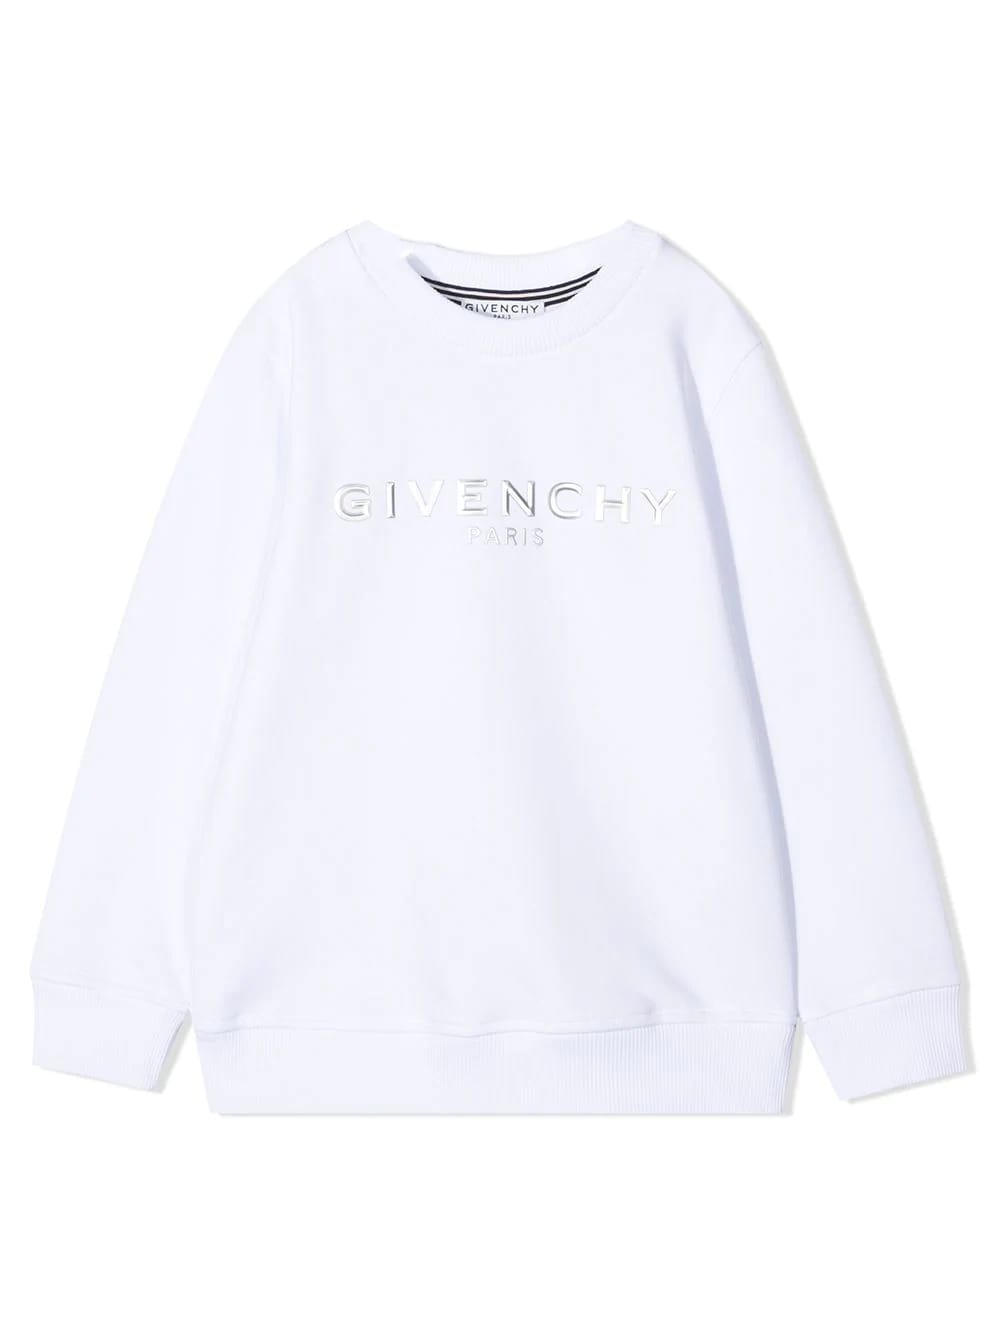 Givenchy Sweatshirt With Application